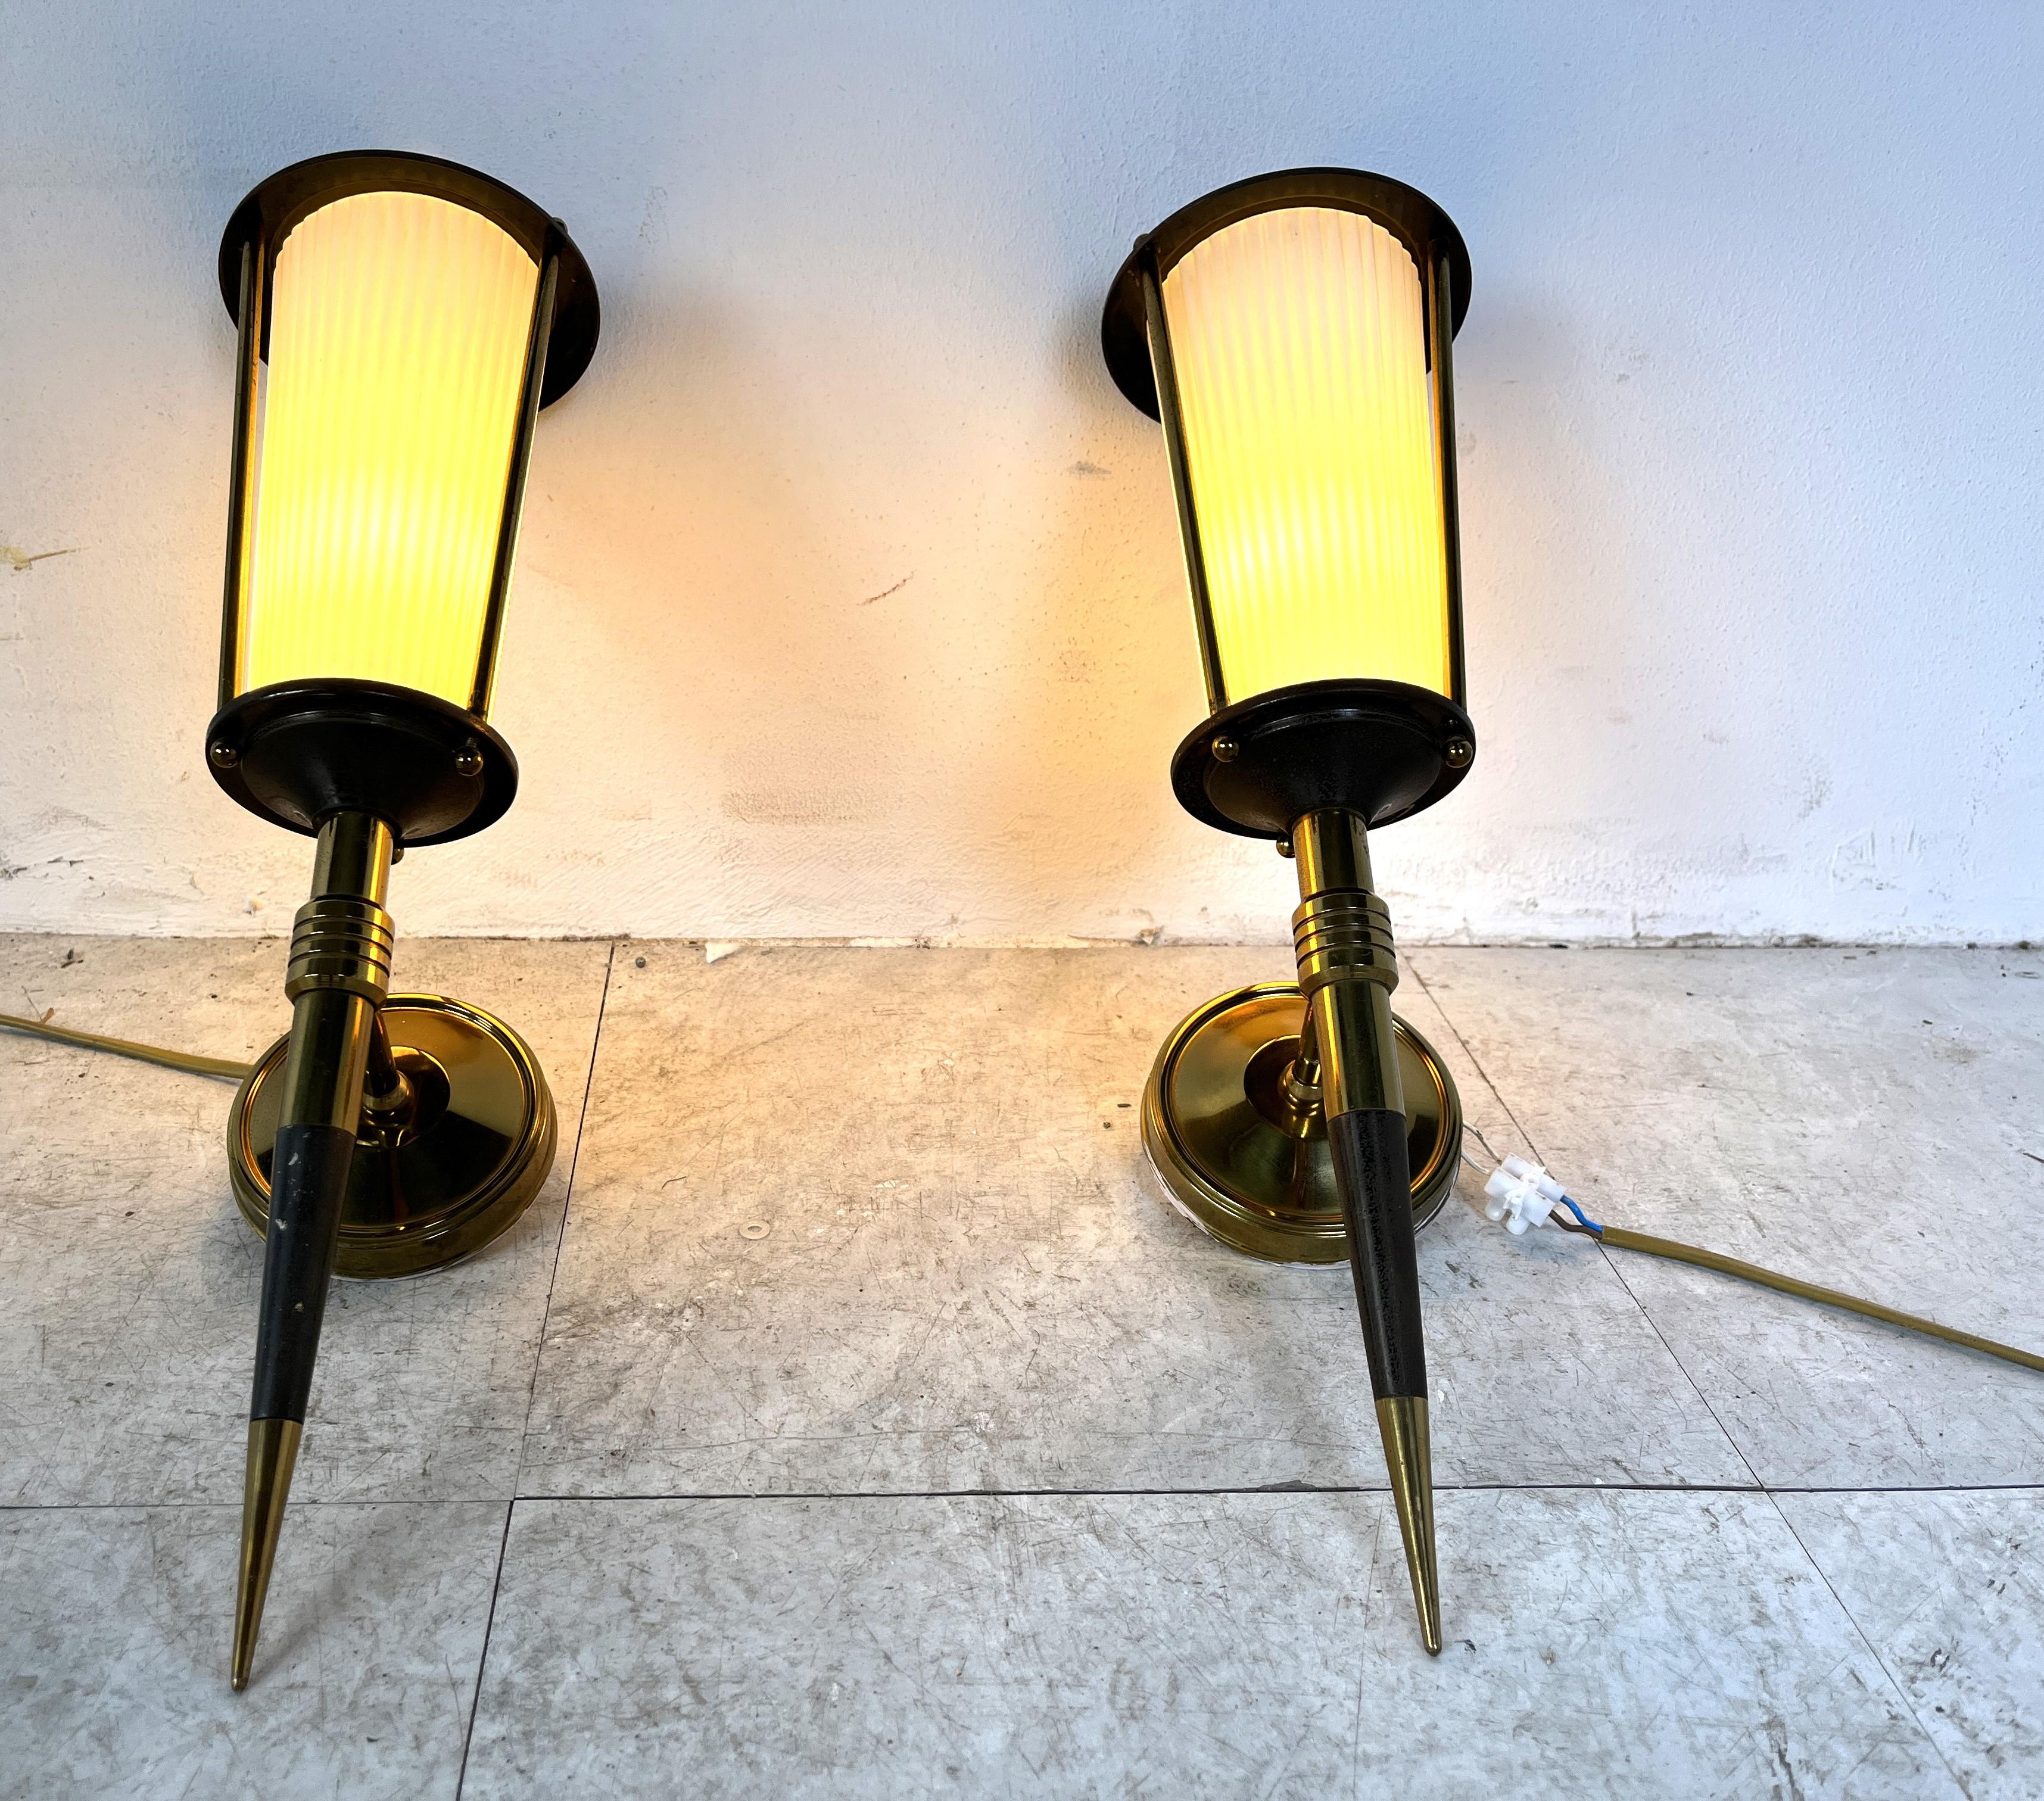 French Vintage pair of wall sconces by Maison Arlus, 1950s